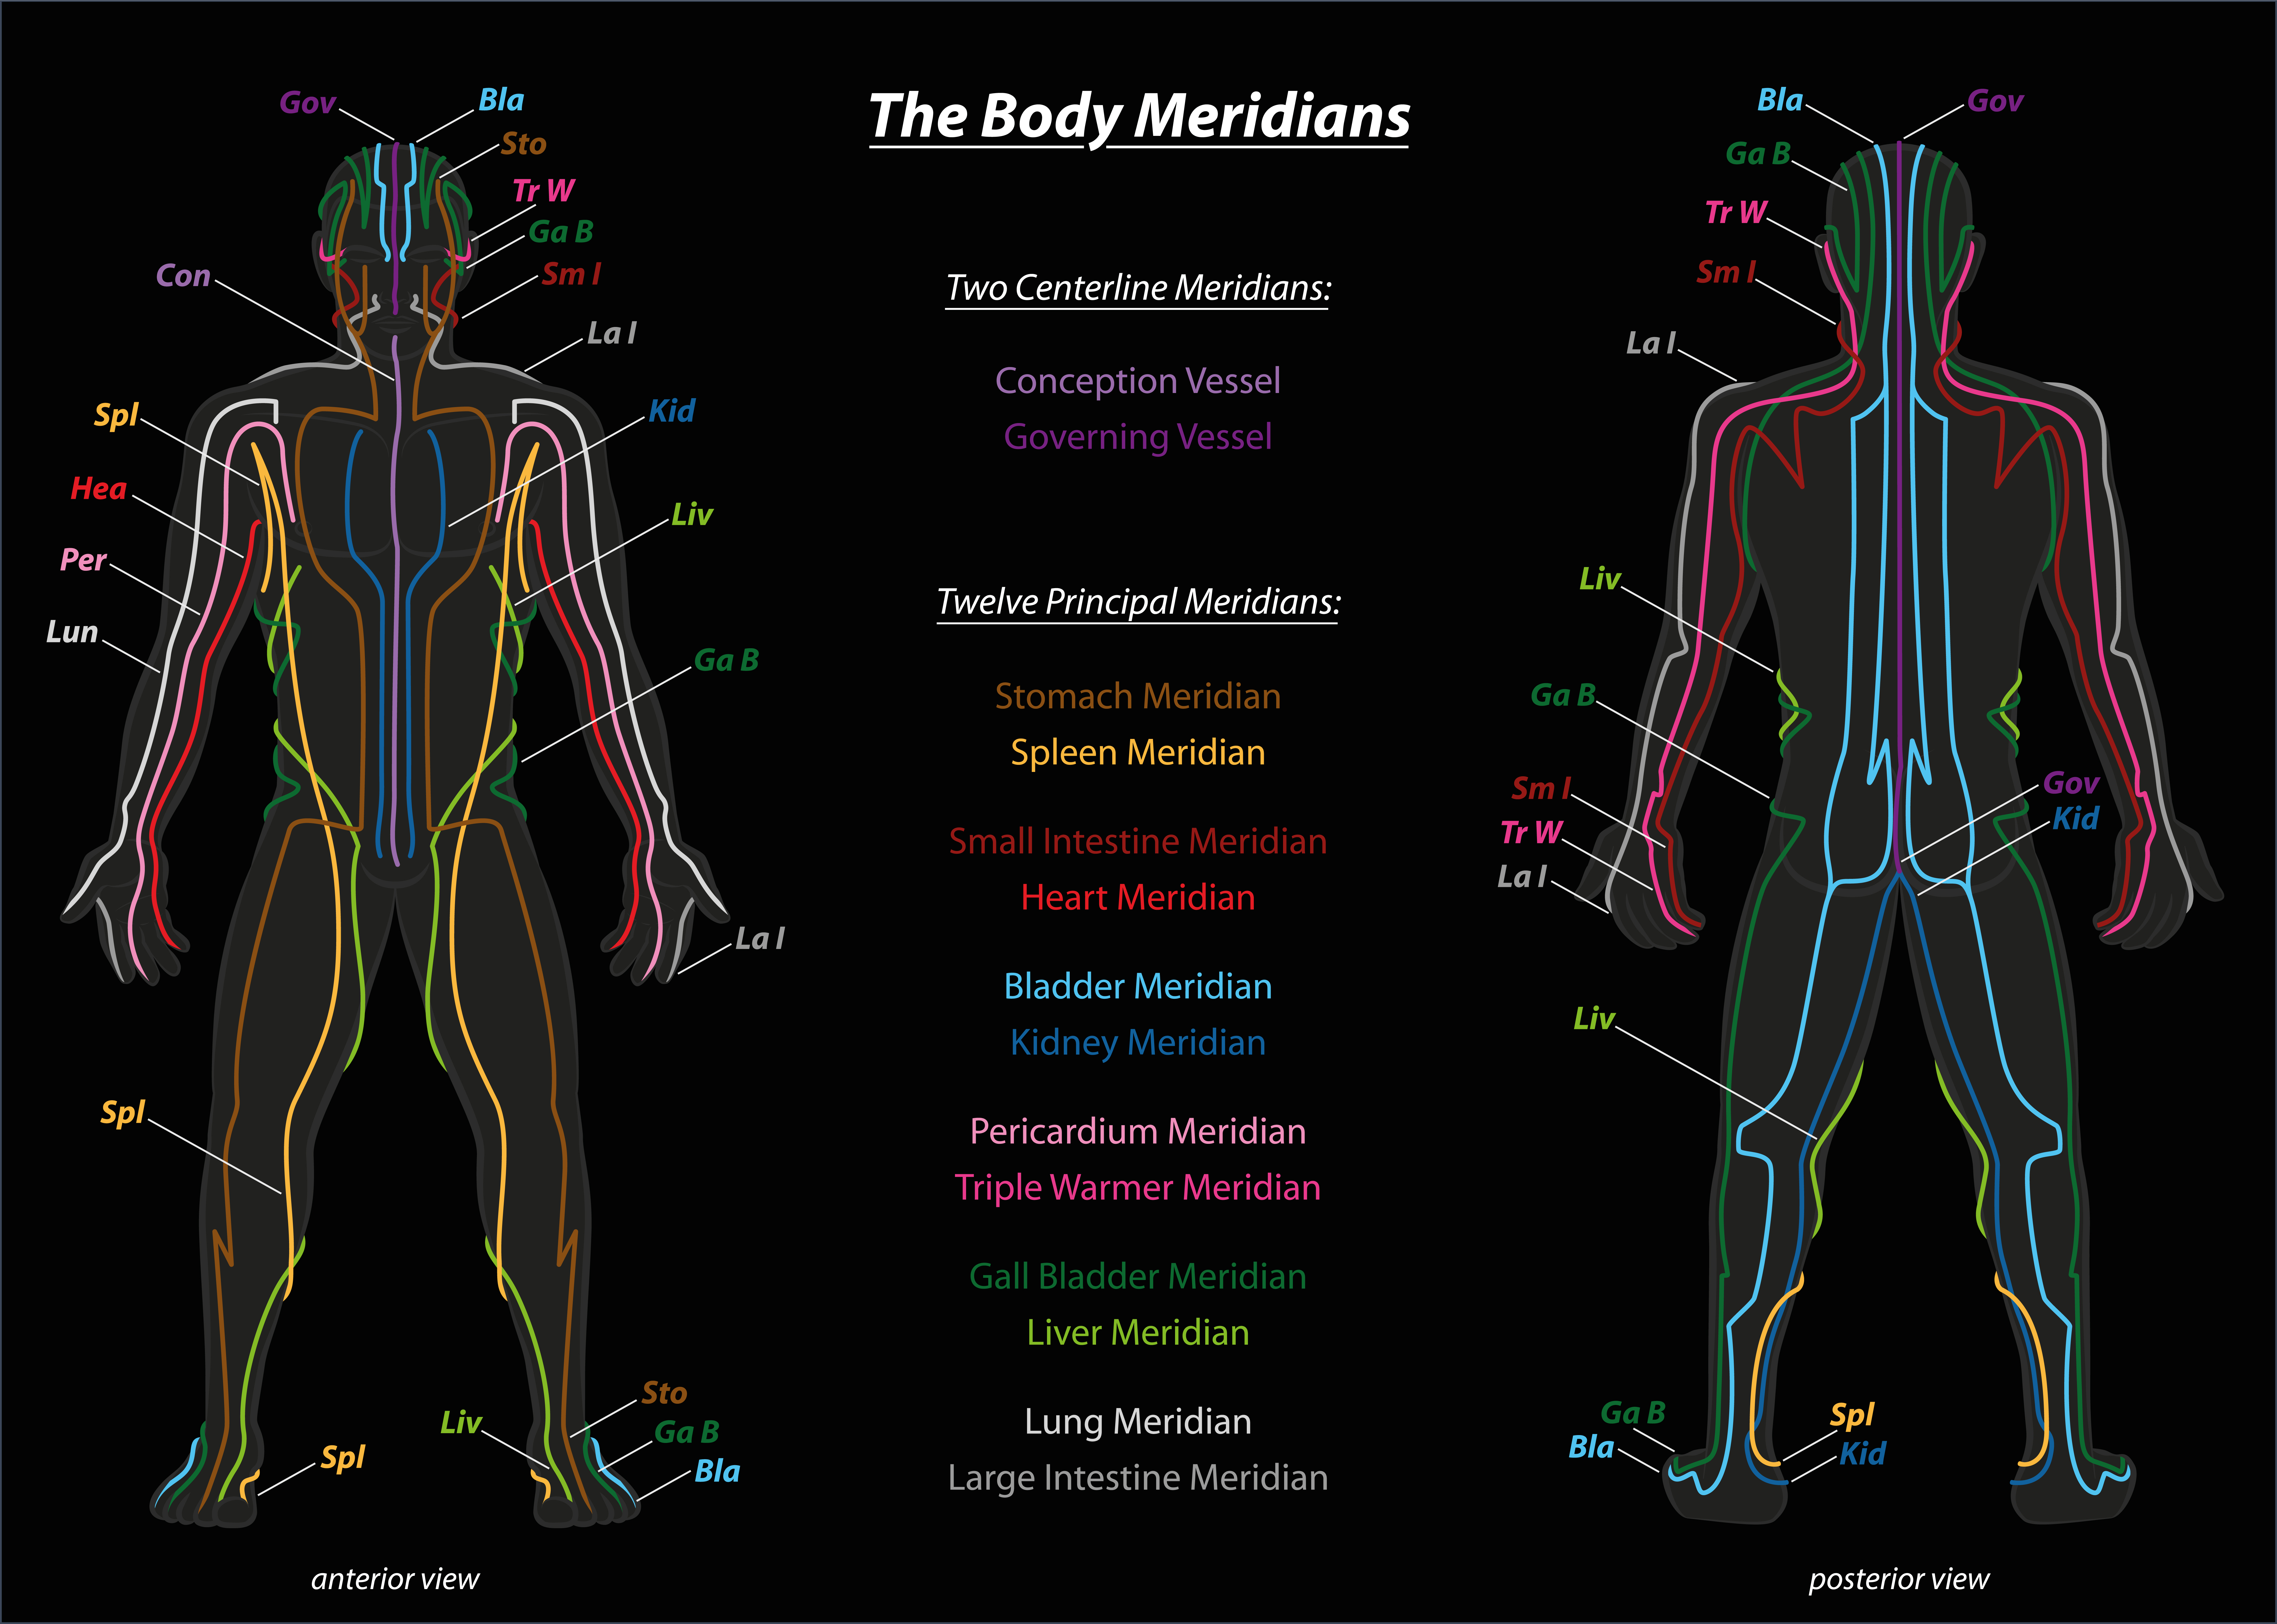 Detailed illustration of the 12 acupuncture meridians on a human body